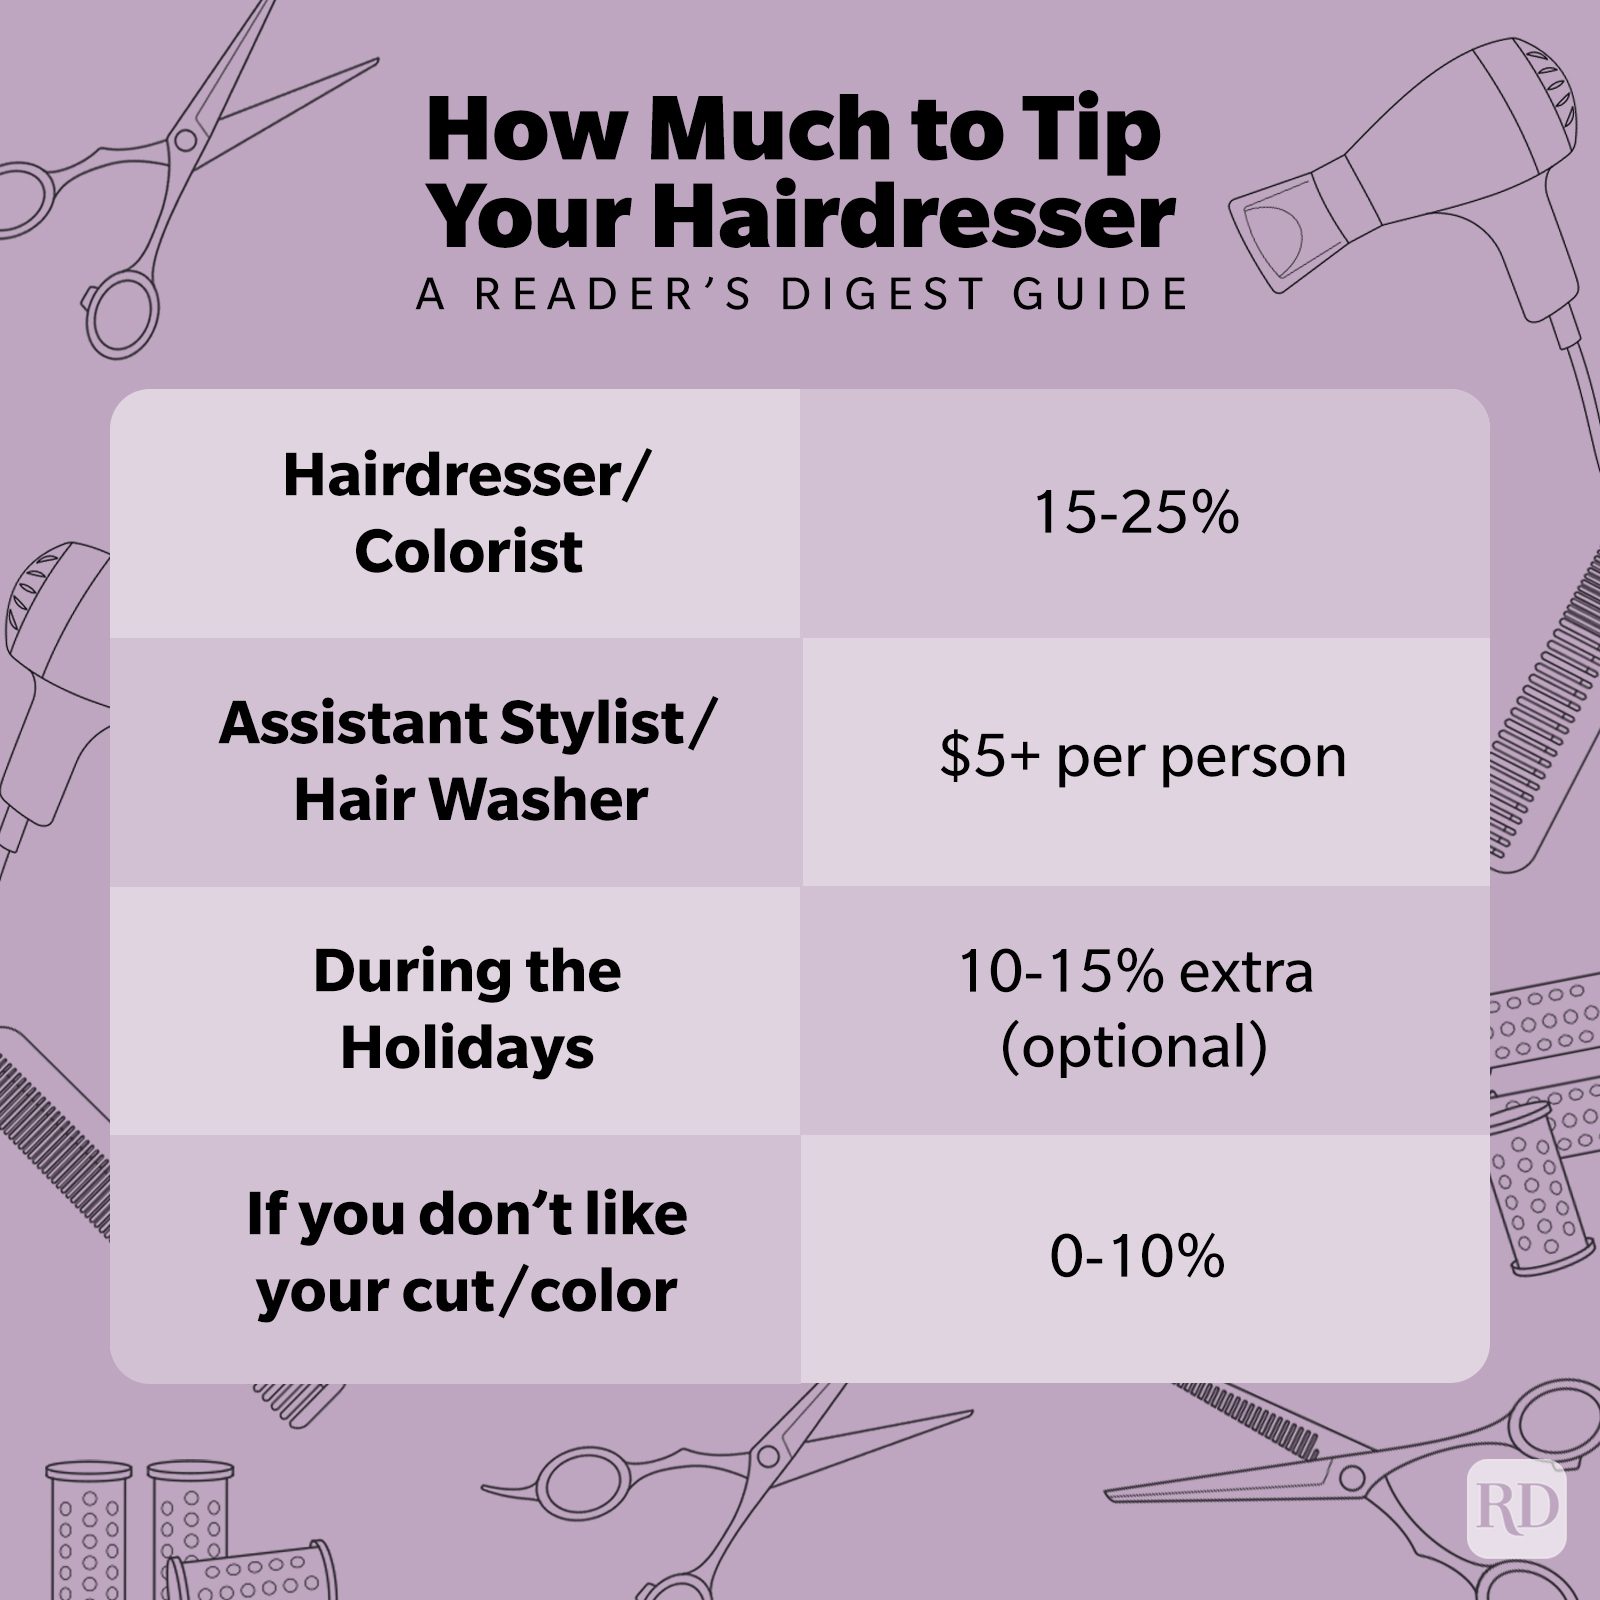 How Much To Tip Your Hairdresser Infographic ?fit=680,680